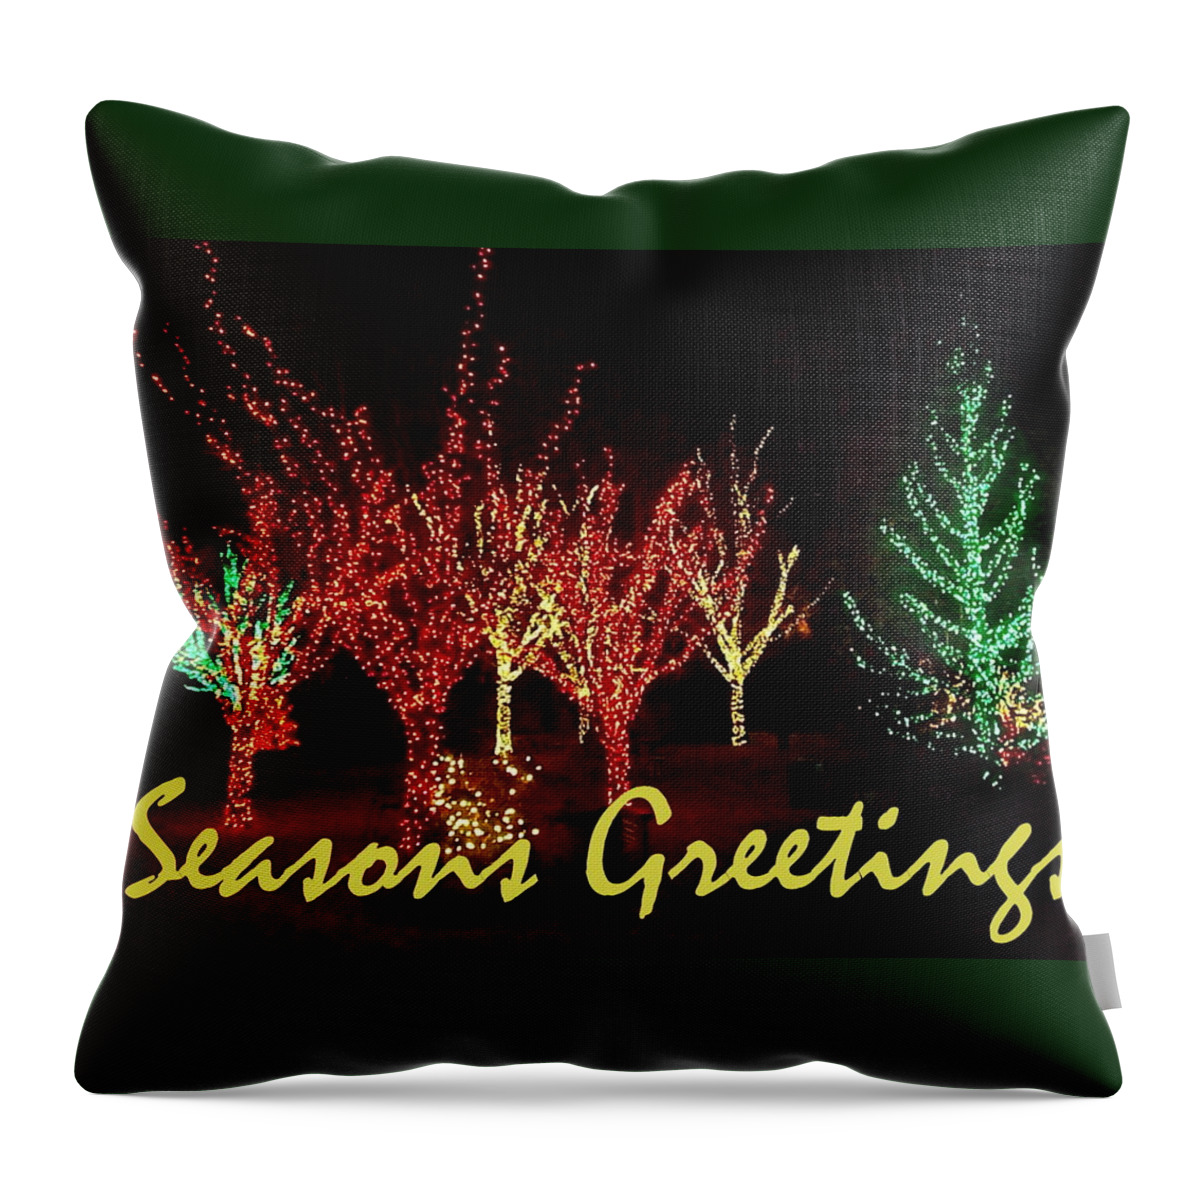 Seasons Greetings Throw Pillow featuring the painting Seasons Greetings by Darren Robinson